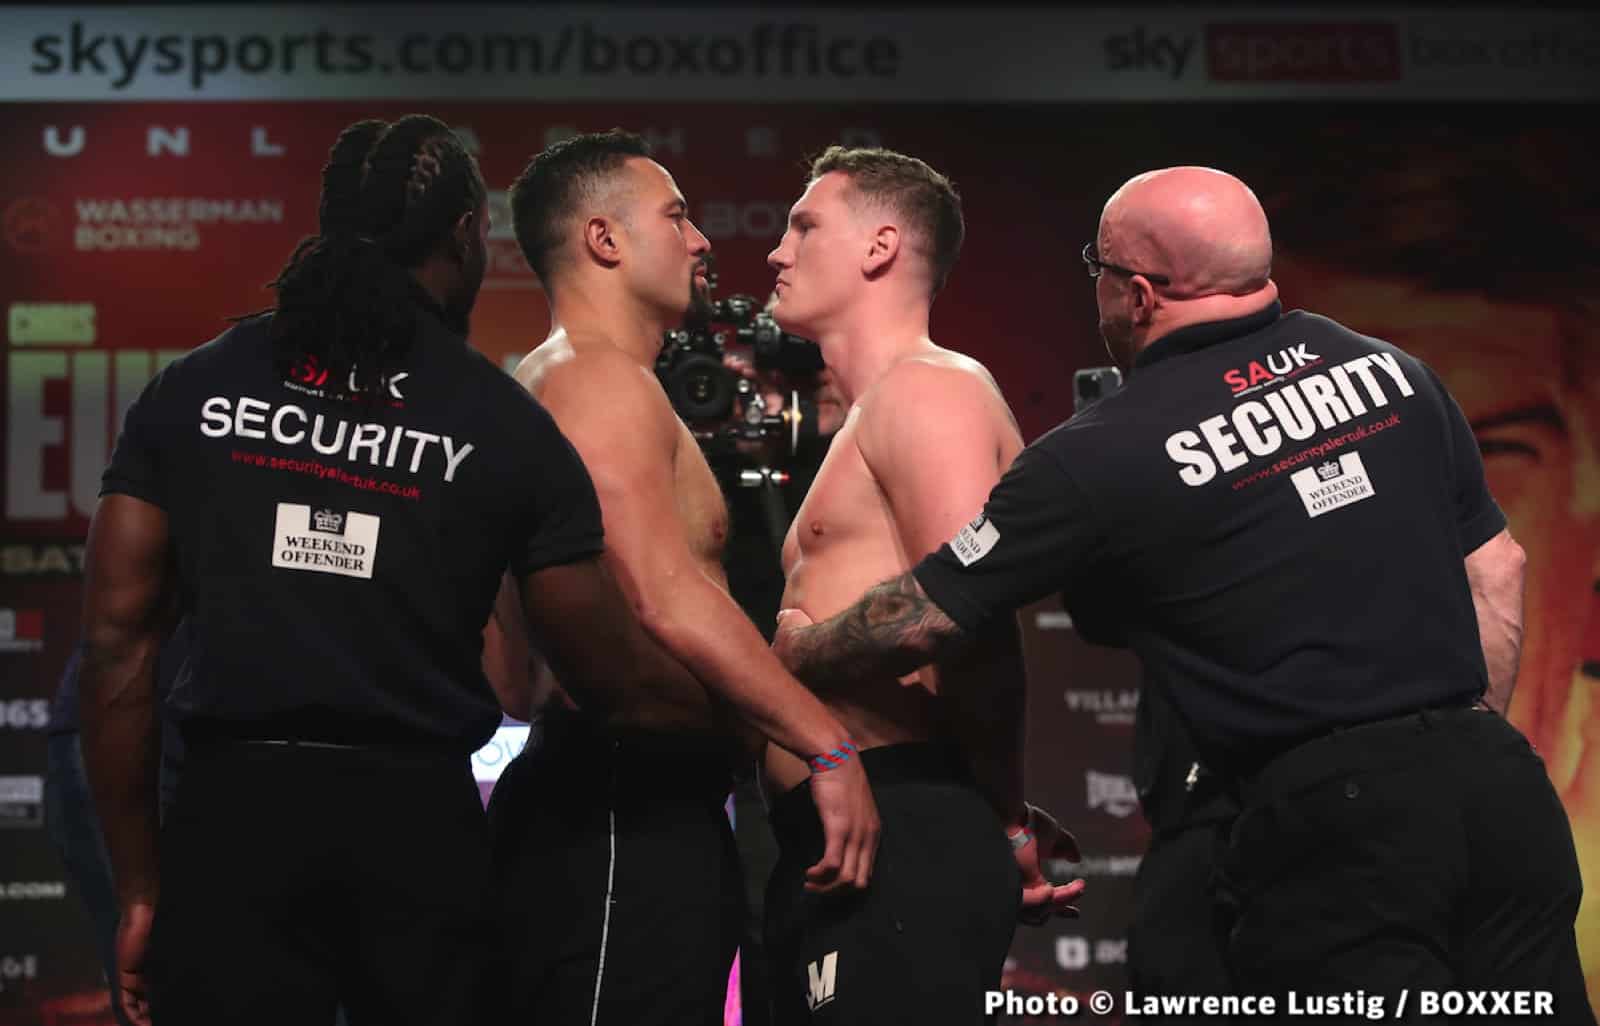 Chris Eubank Jr, Liam Smith Weigh-In – Both Come In At 159 Pounds